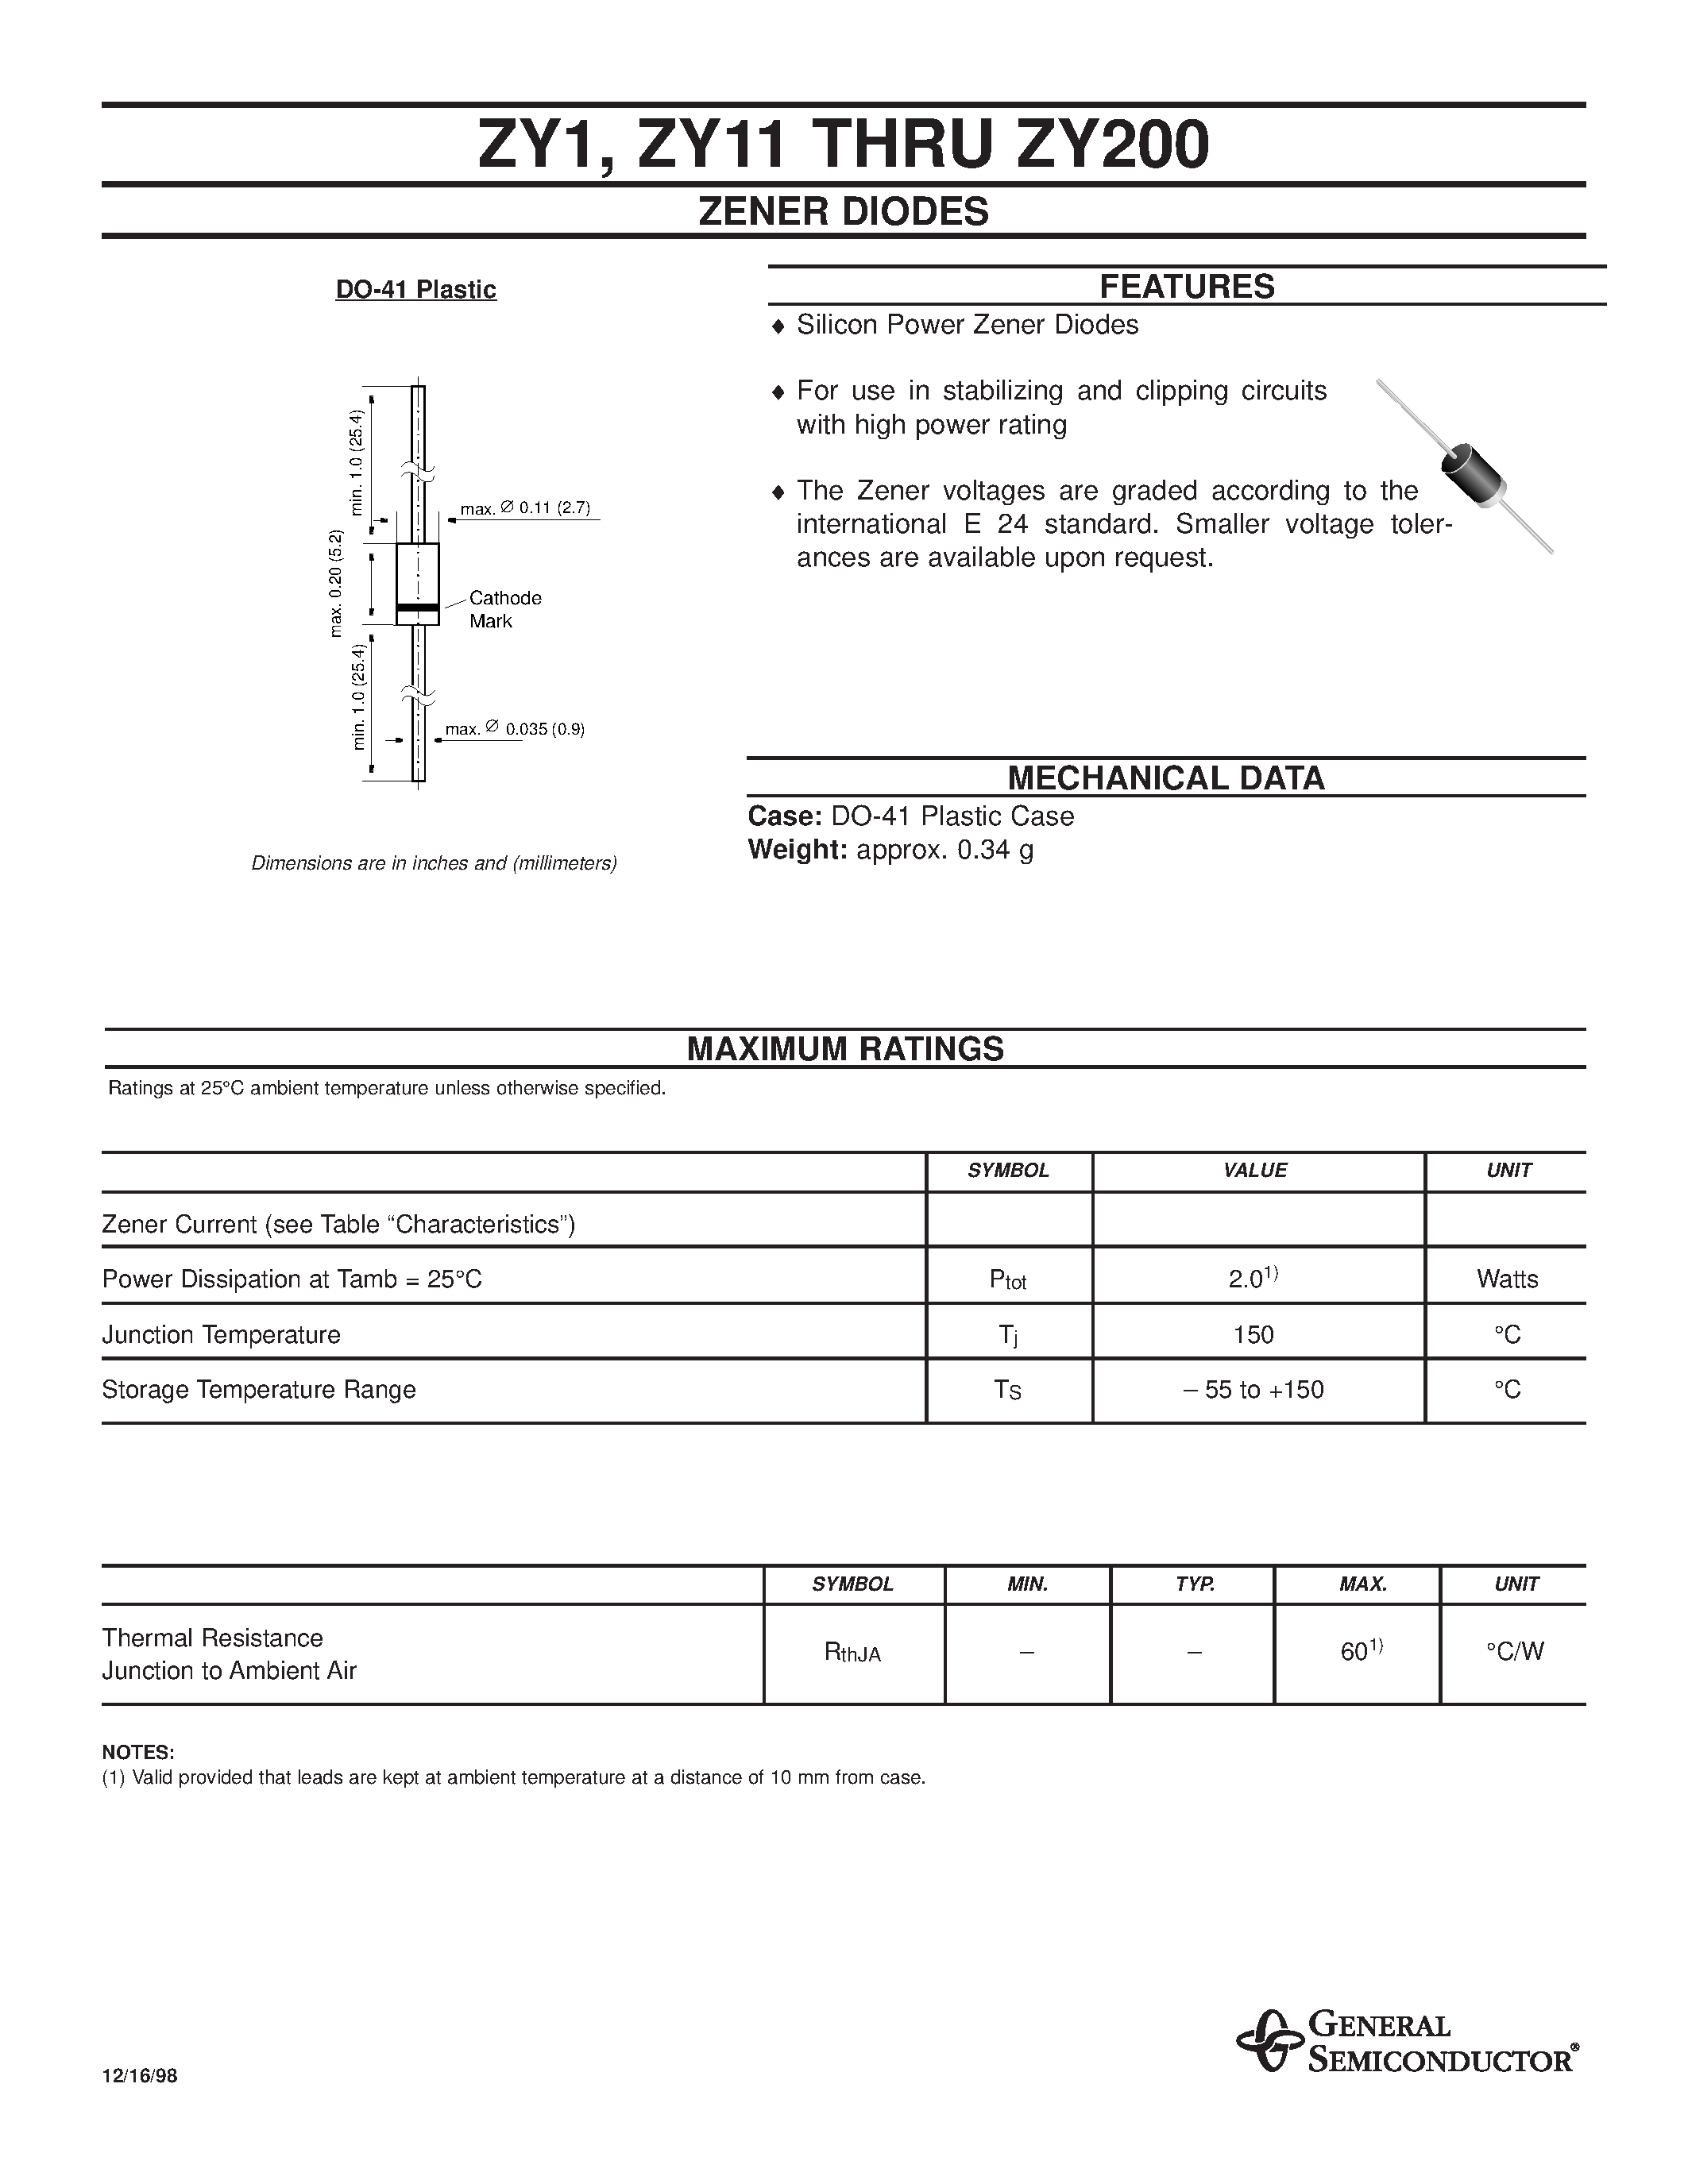 Datasheet ZY62 - ZENER DIODES page 1